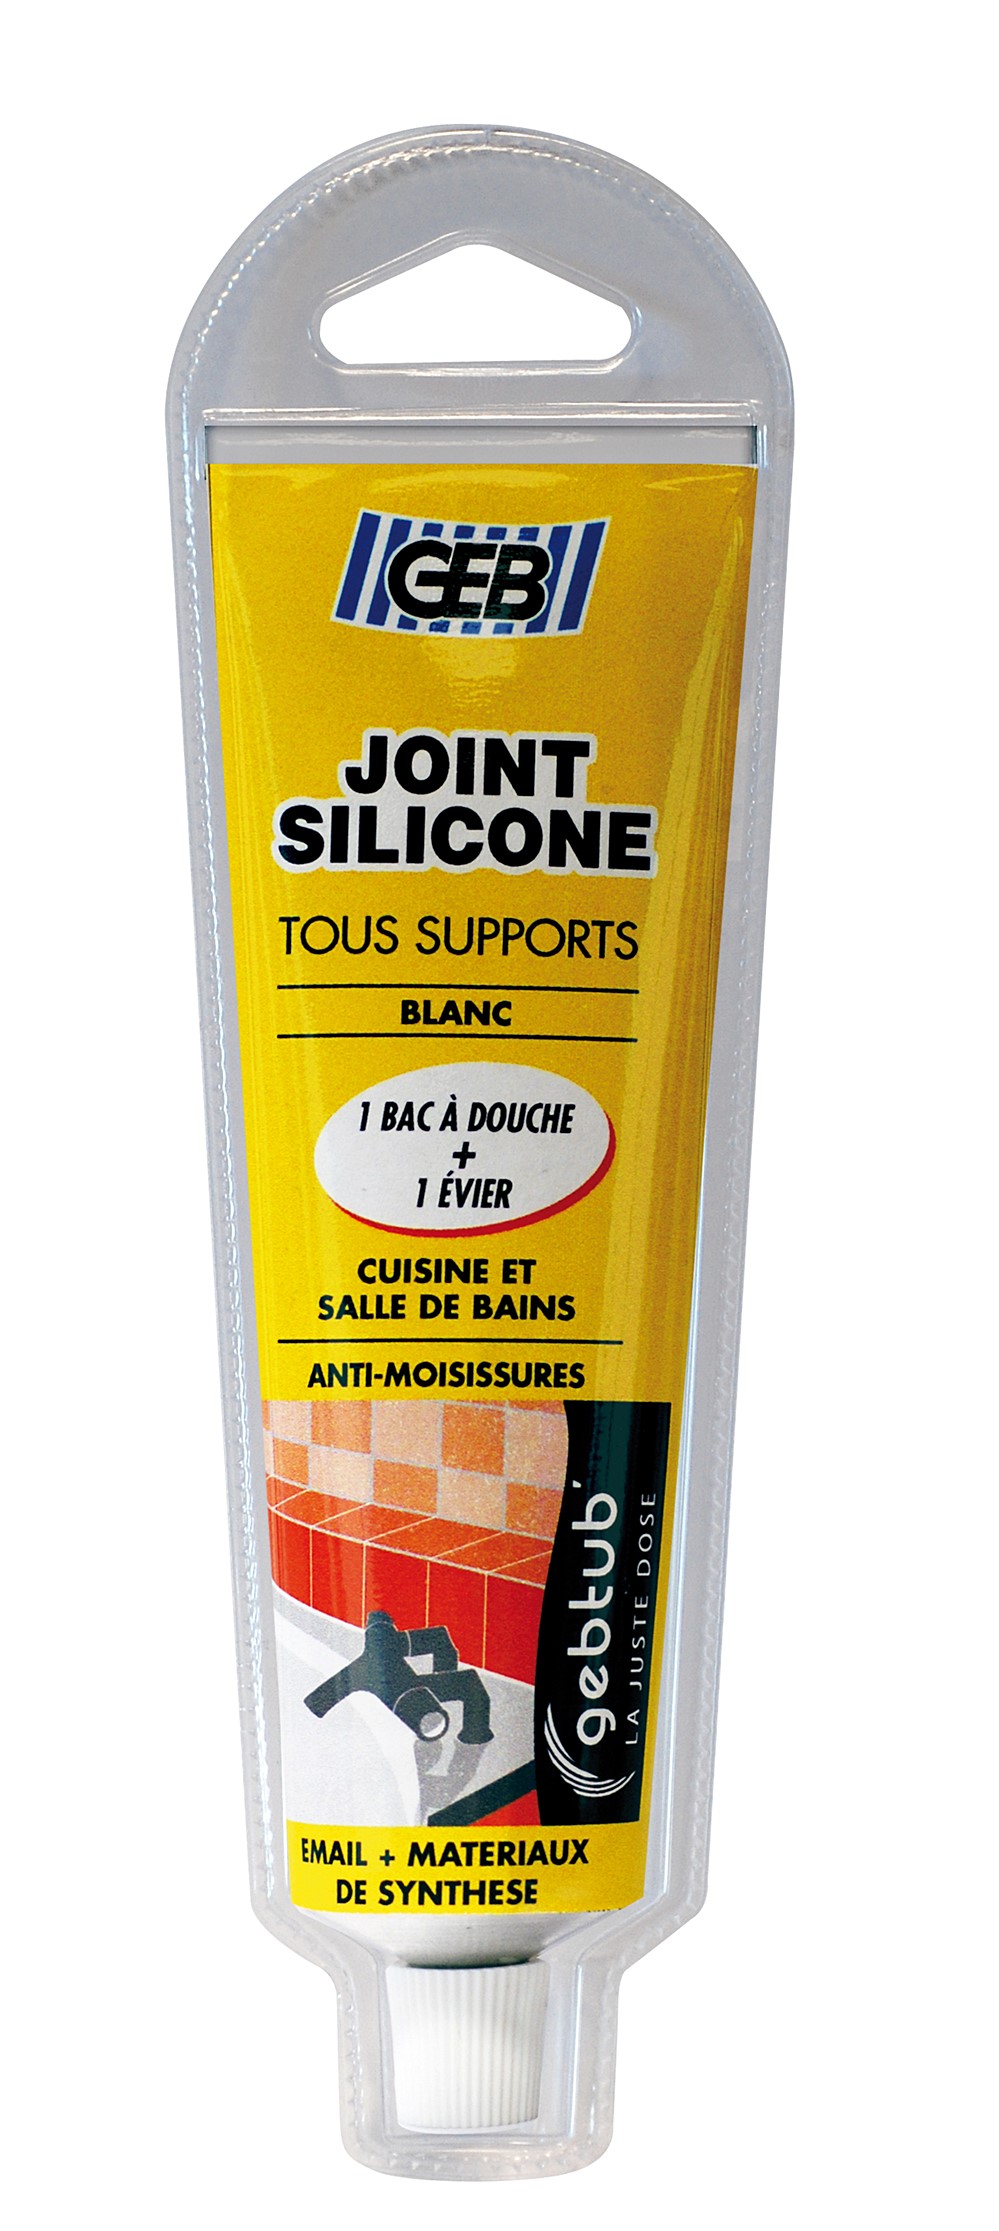 Silicone Tous Supports Blanc 100ml - GEB